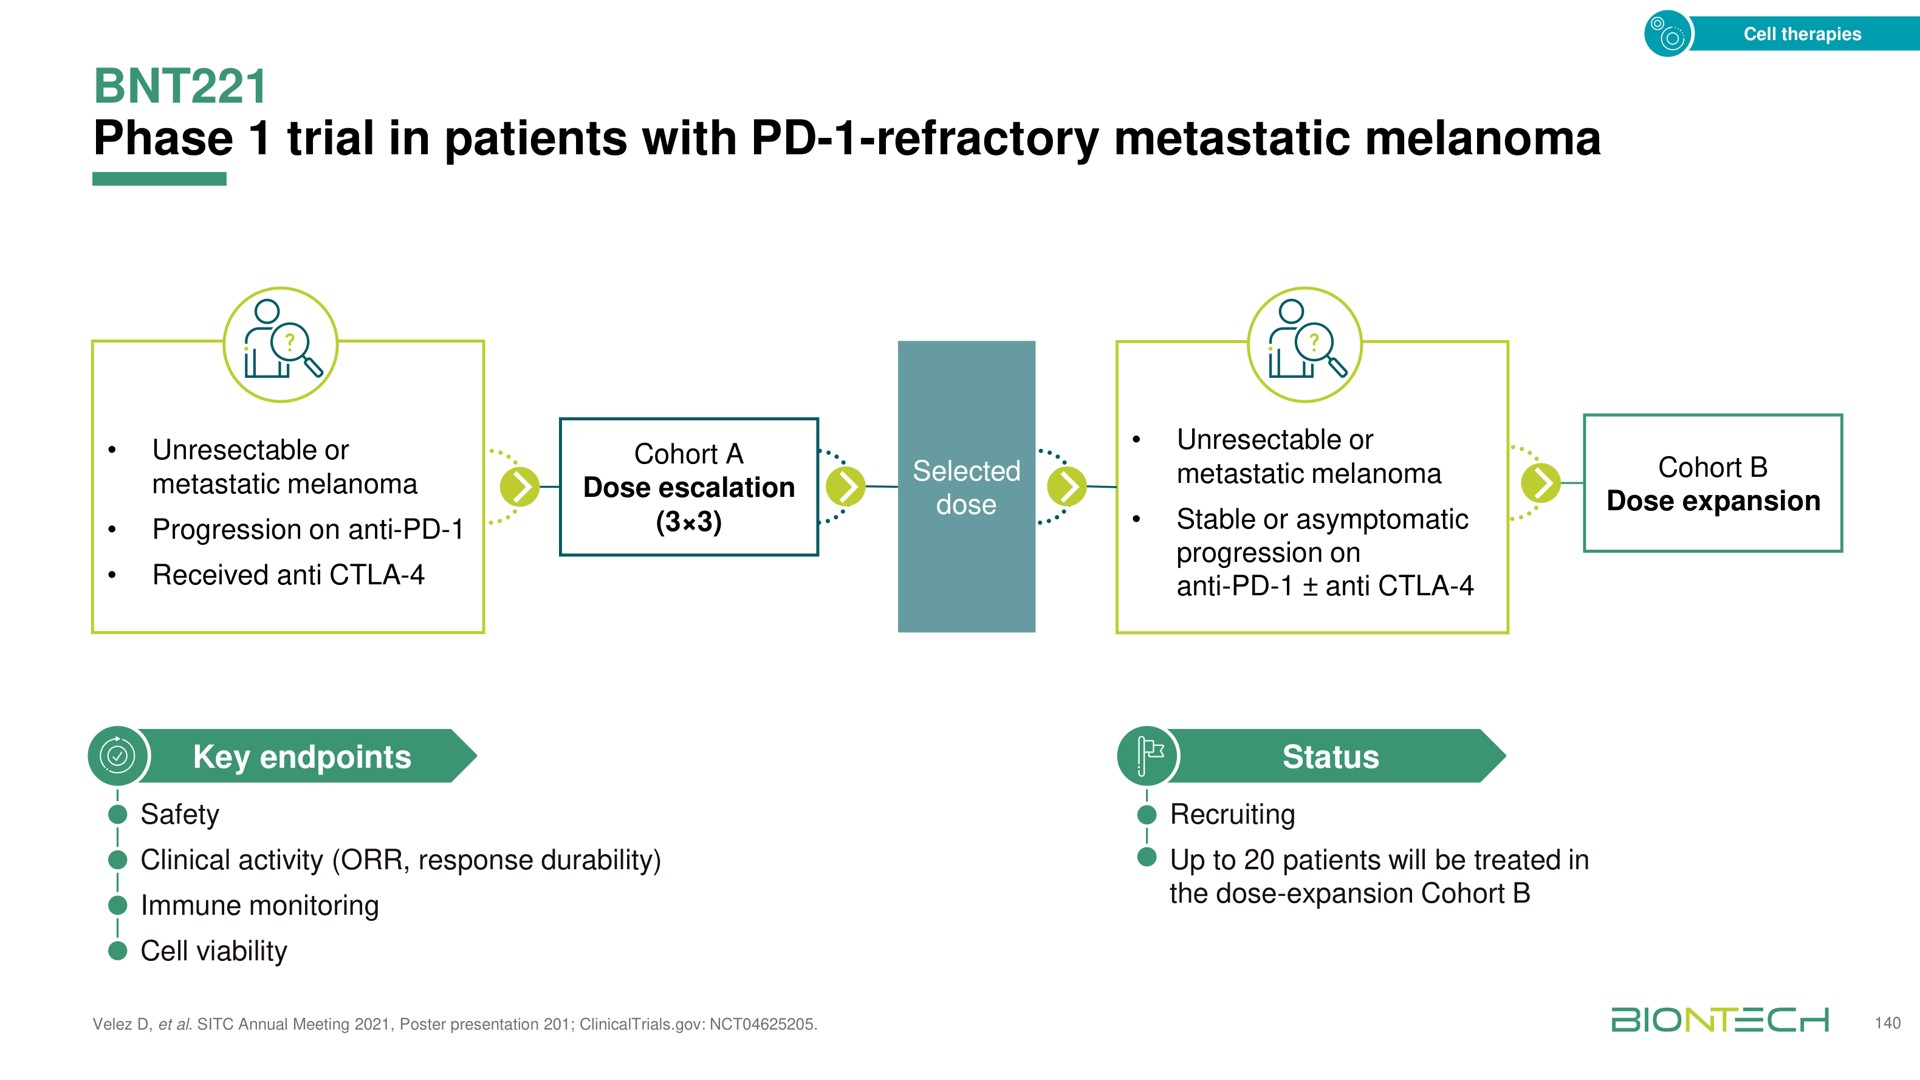 phase trial in patients with refractory metastatic melanoma is is status | BioNTech